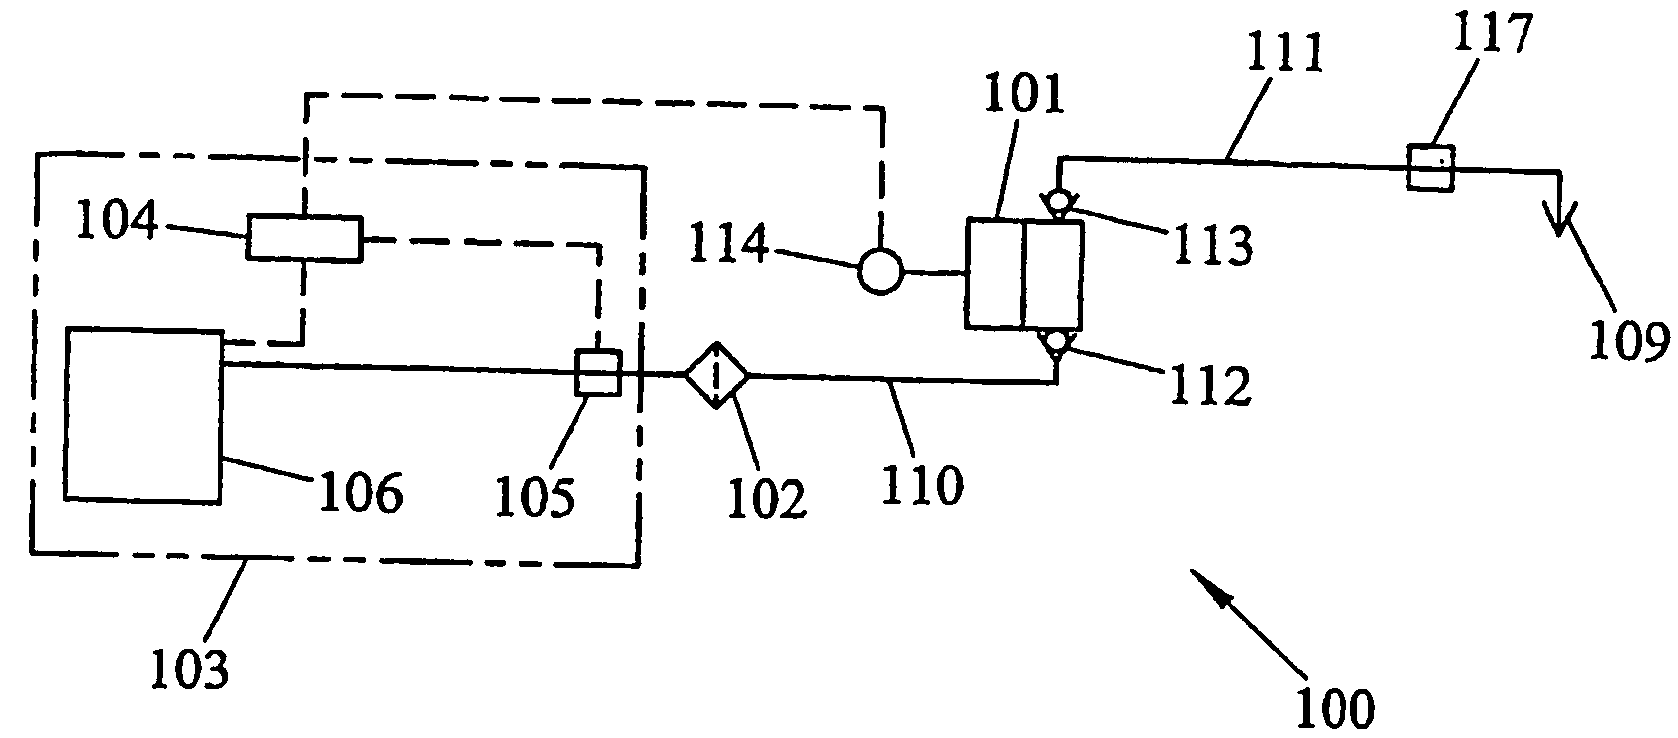 Liquids dispensing systems and methods